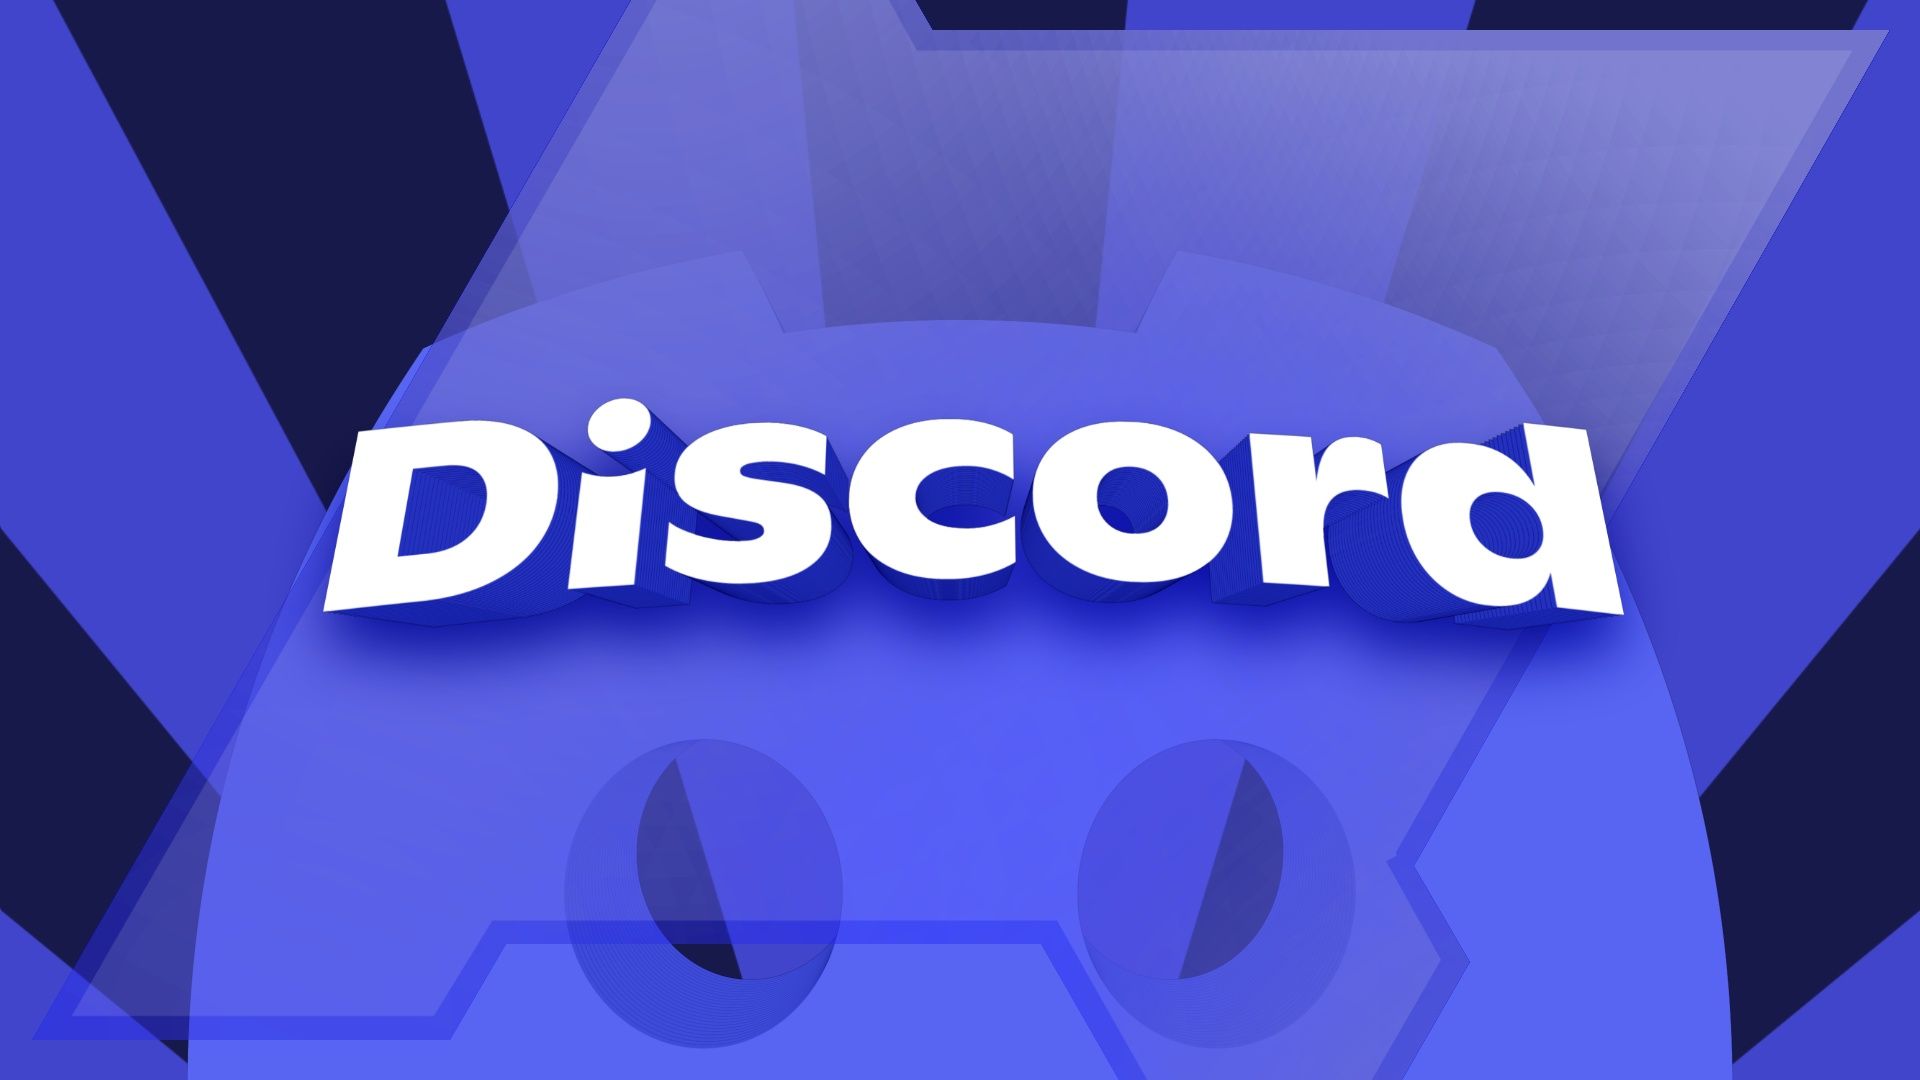 Discord’s latest update brings a big change to mobile devices, for better or worse